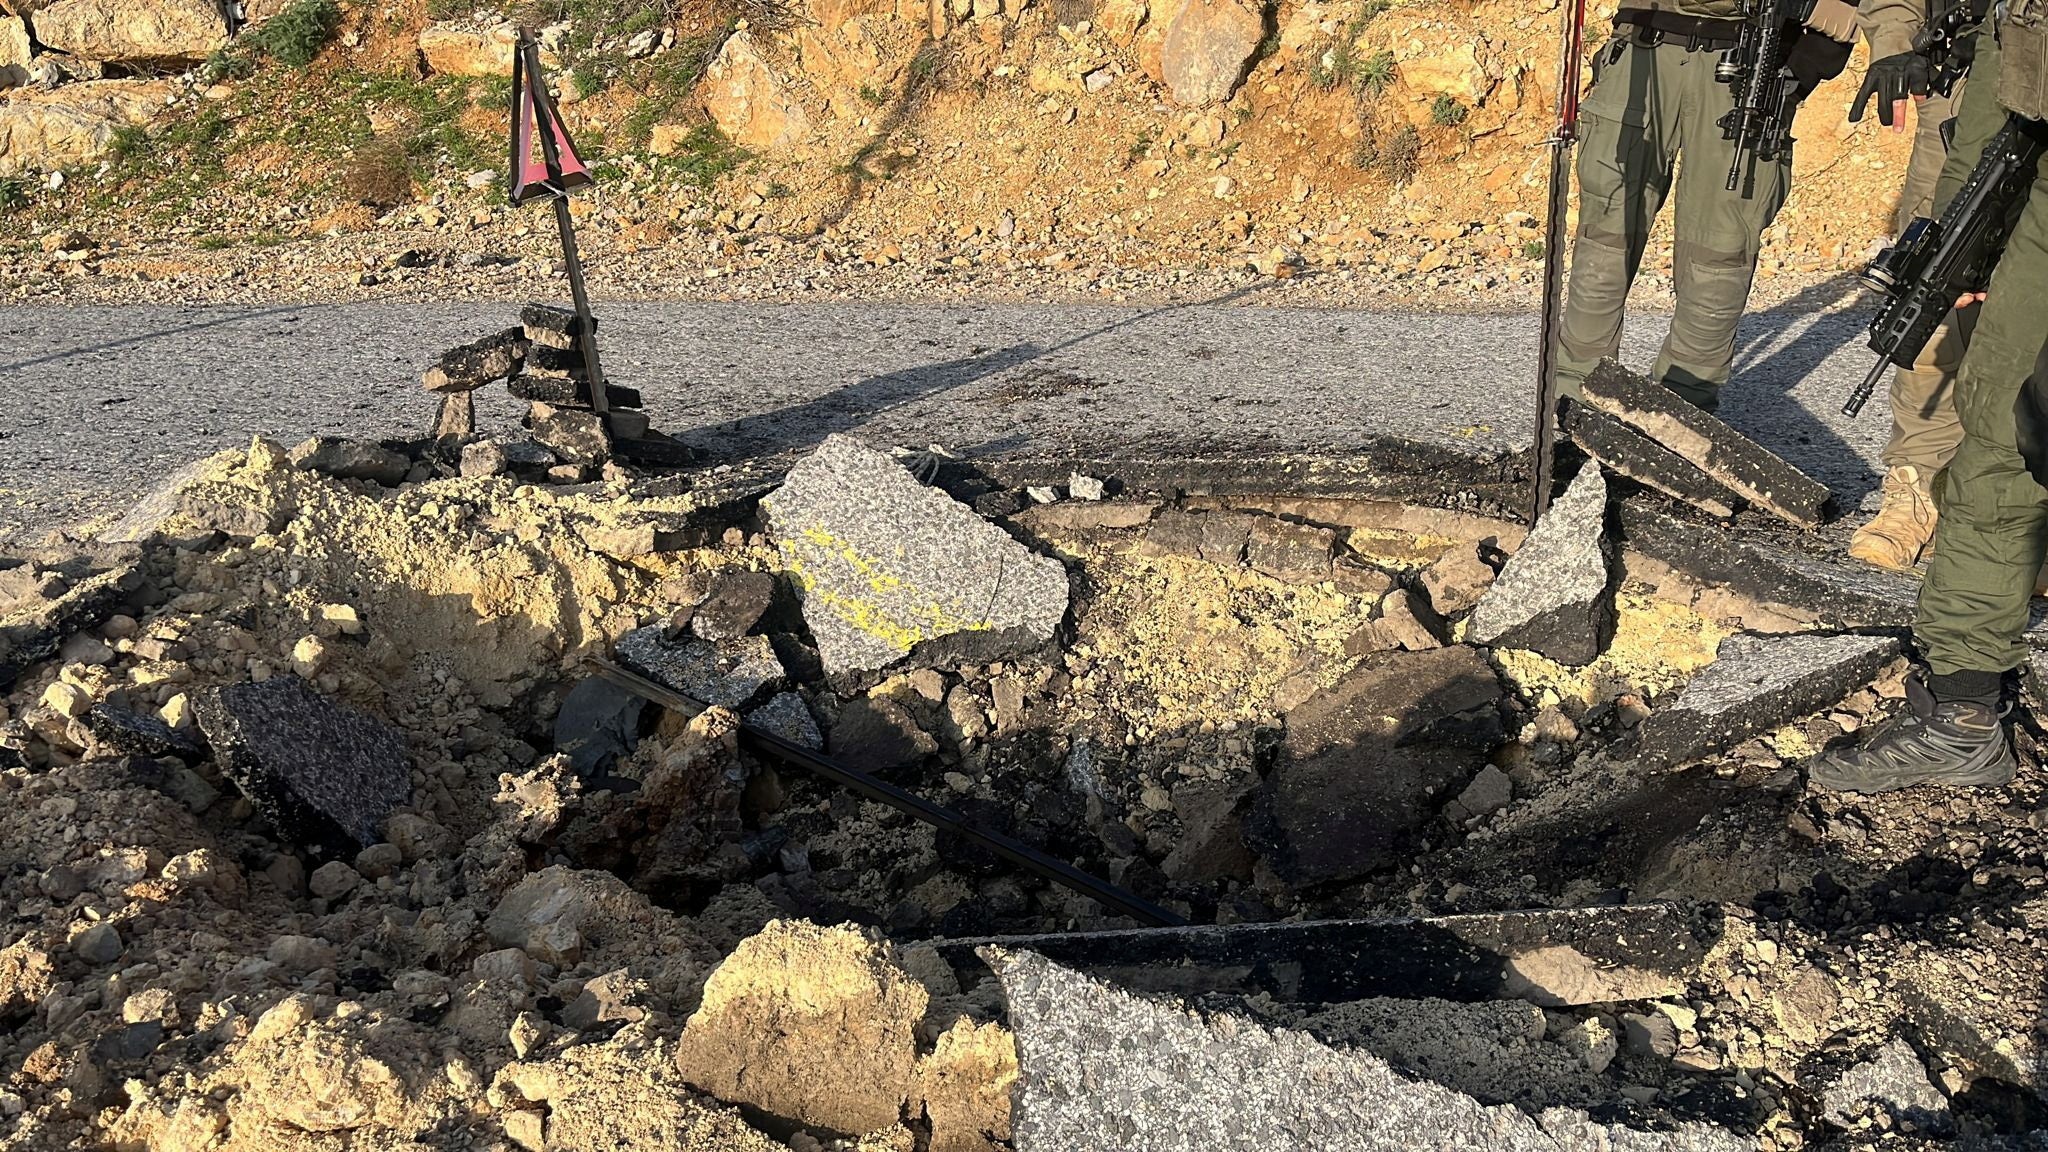 A view of a crater on a damaged road, after Iran's mass drone and missile attack, at a location given as Hermon area, Israel